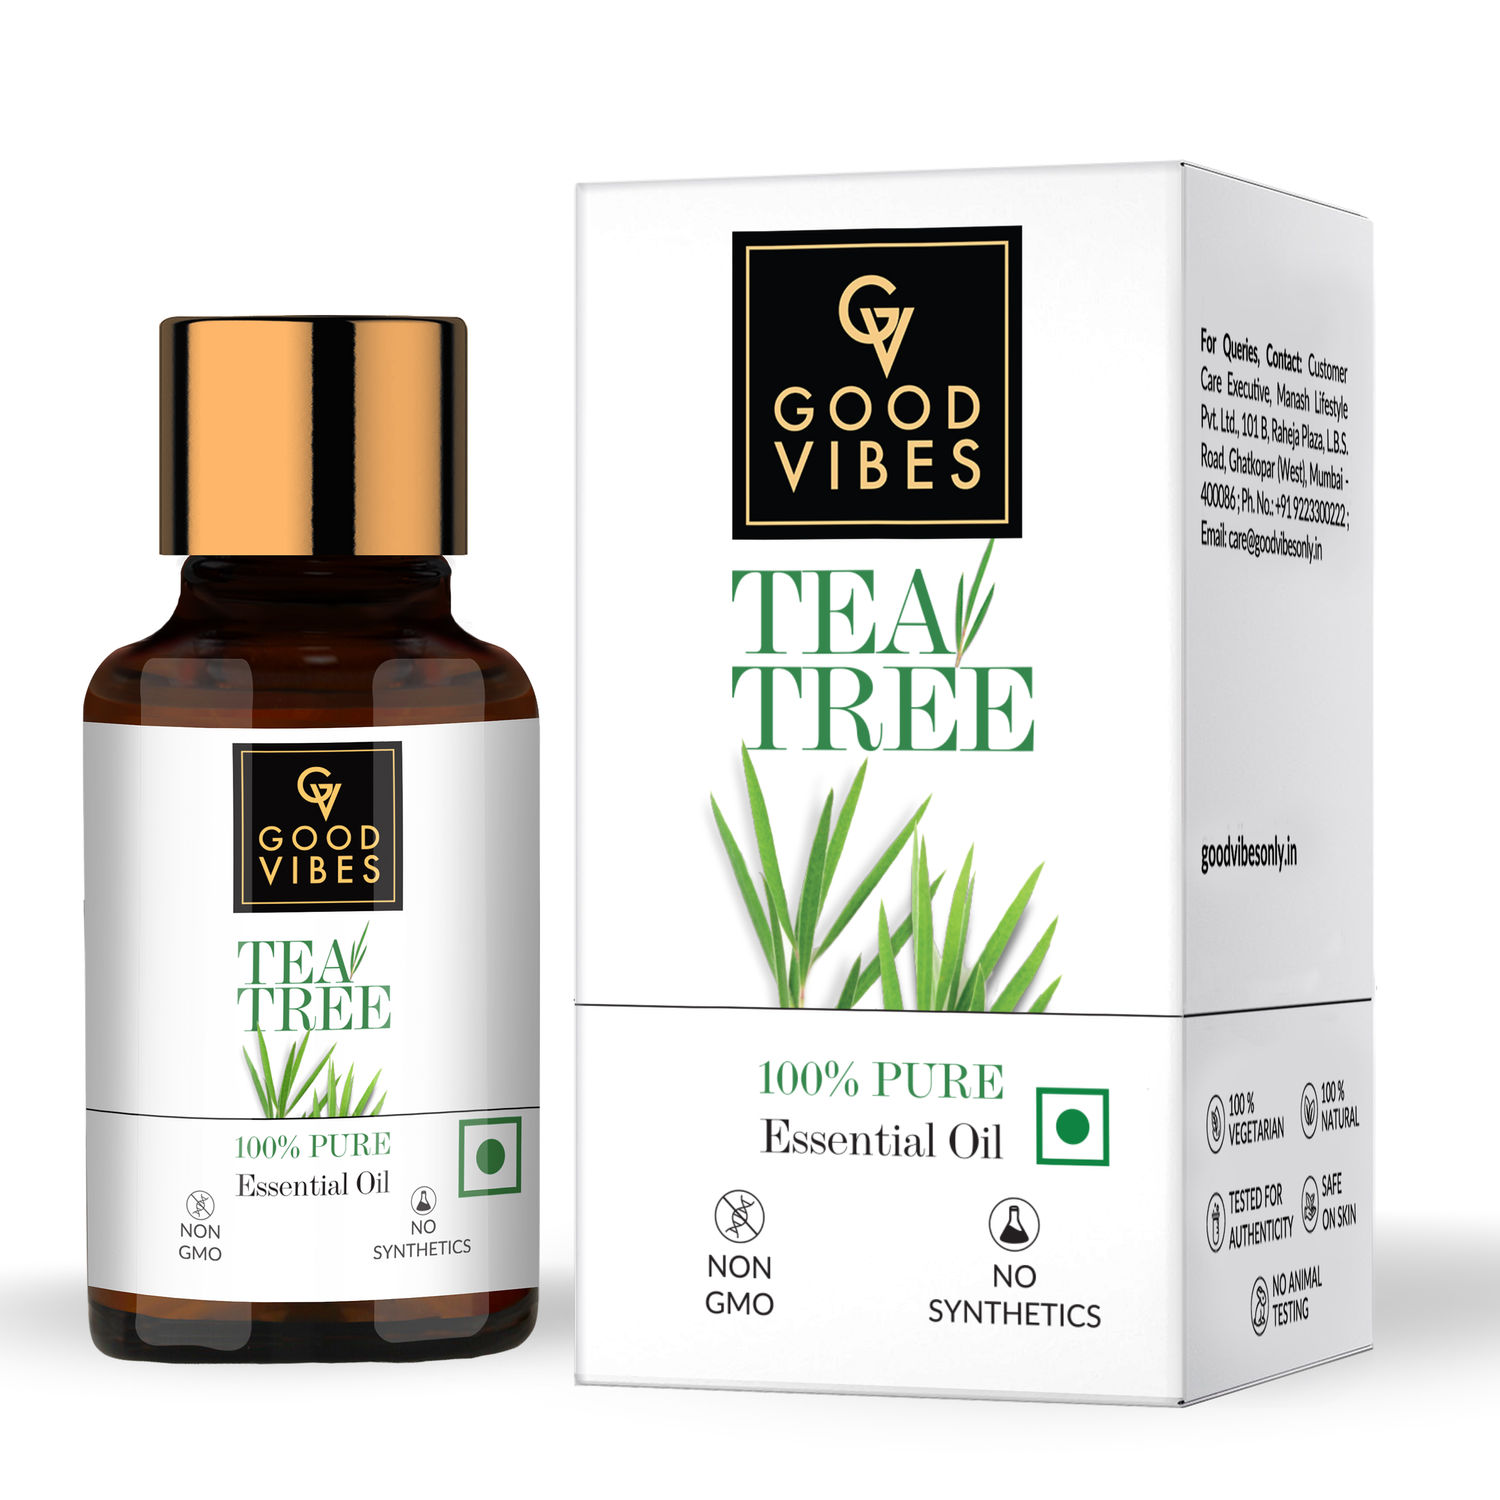 Buy Good Vibes 100% Pure Tea Tree Essential Oil | Anti-Acne, Helps Clears Pimples | No Synthetics, 100% Natural, 100% Vegetarian (10 ml) - Purplle